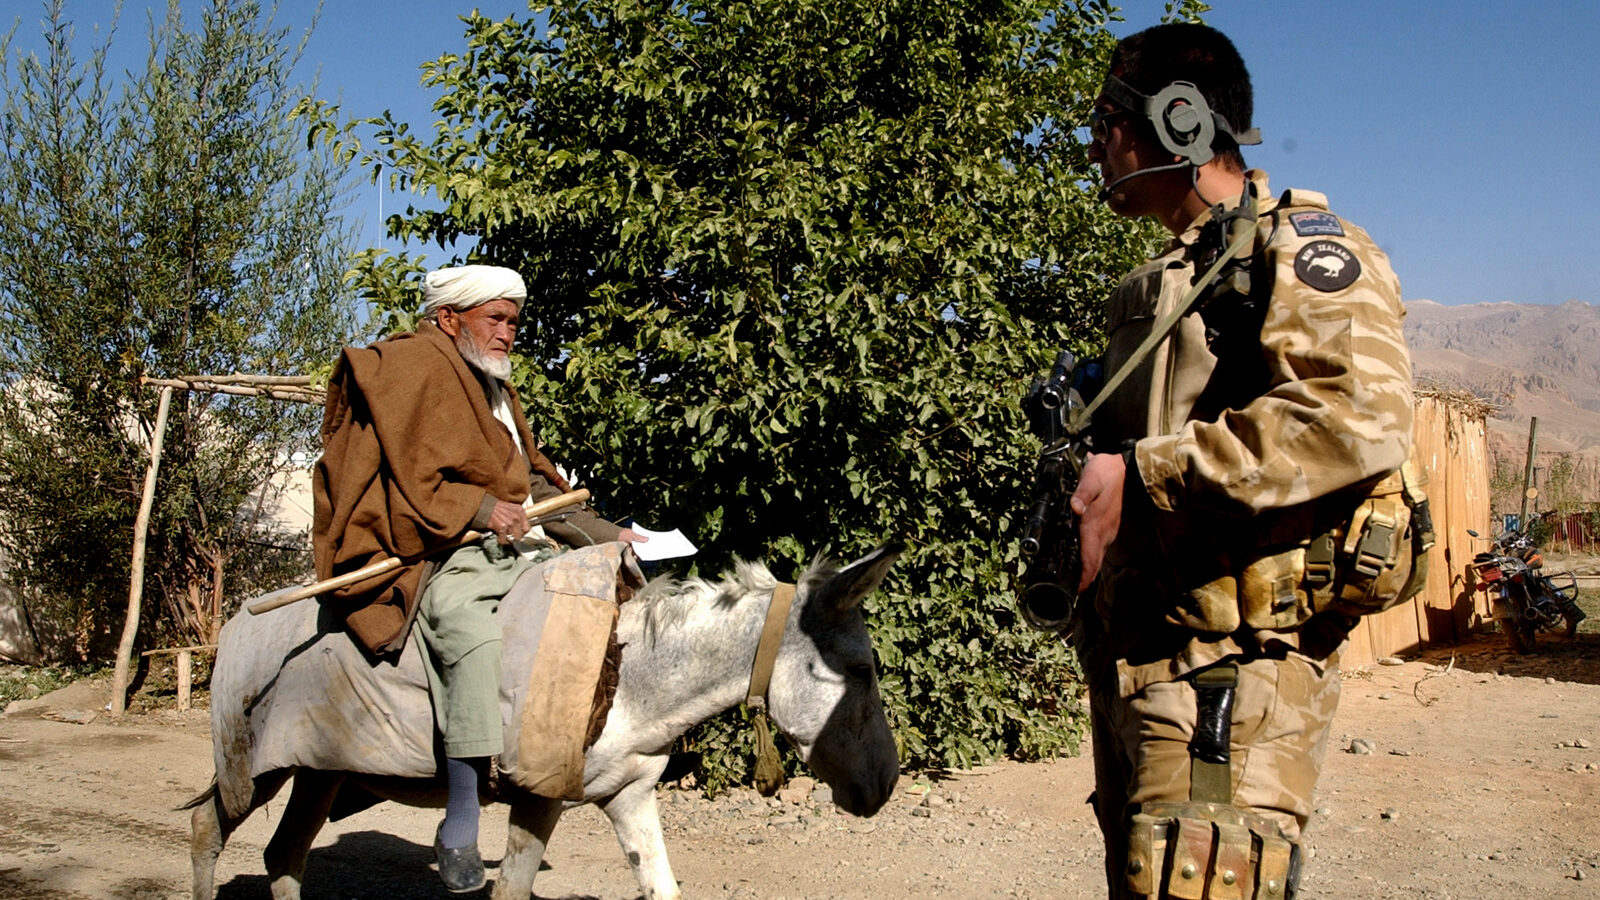 A New Zealand soldier stands guard as an elderly man rides a donkey north west of Kabul, Afghanistan, Oct. 5, 2006. (AP/Musadeq Sadeq)